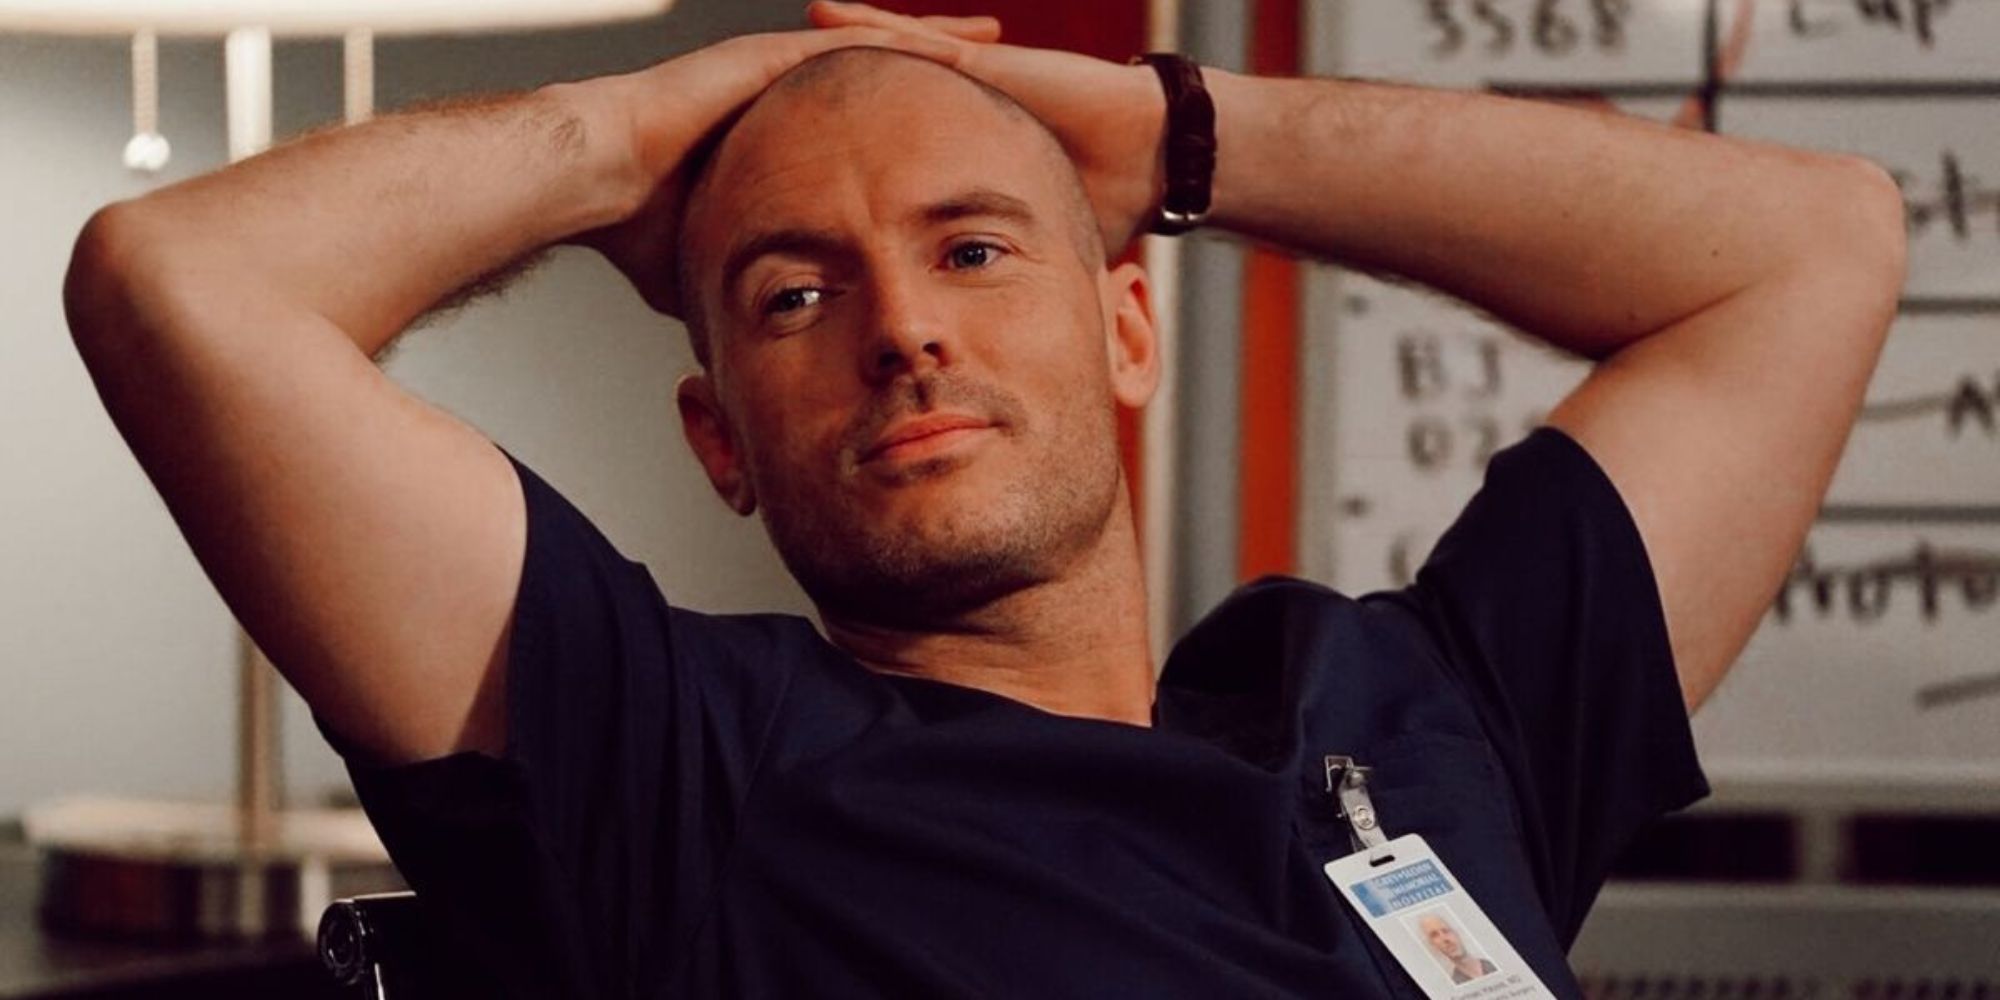 An image of Cormac Hayes with his handss on his head in Grey's Anatomy